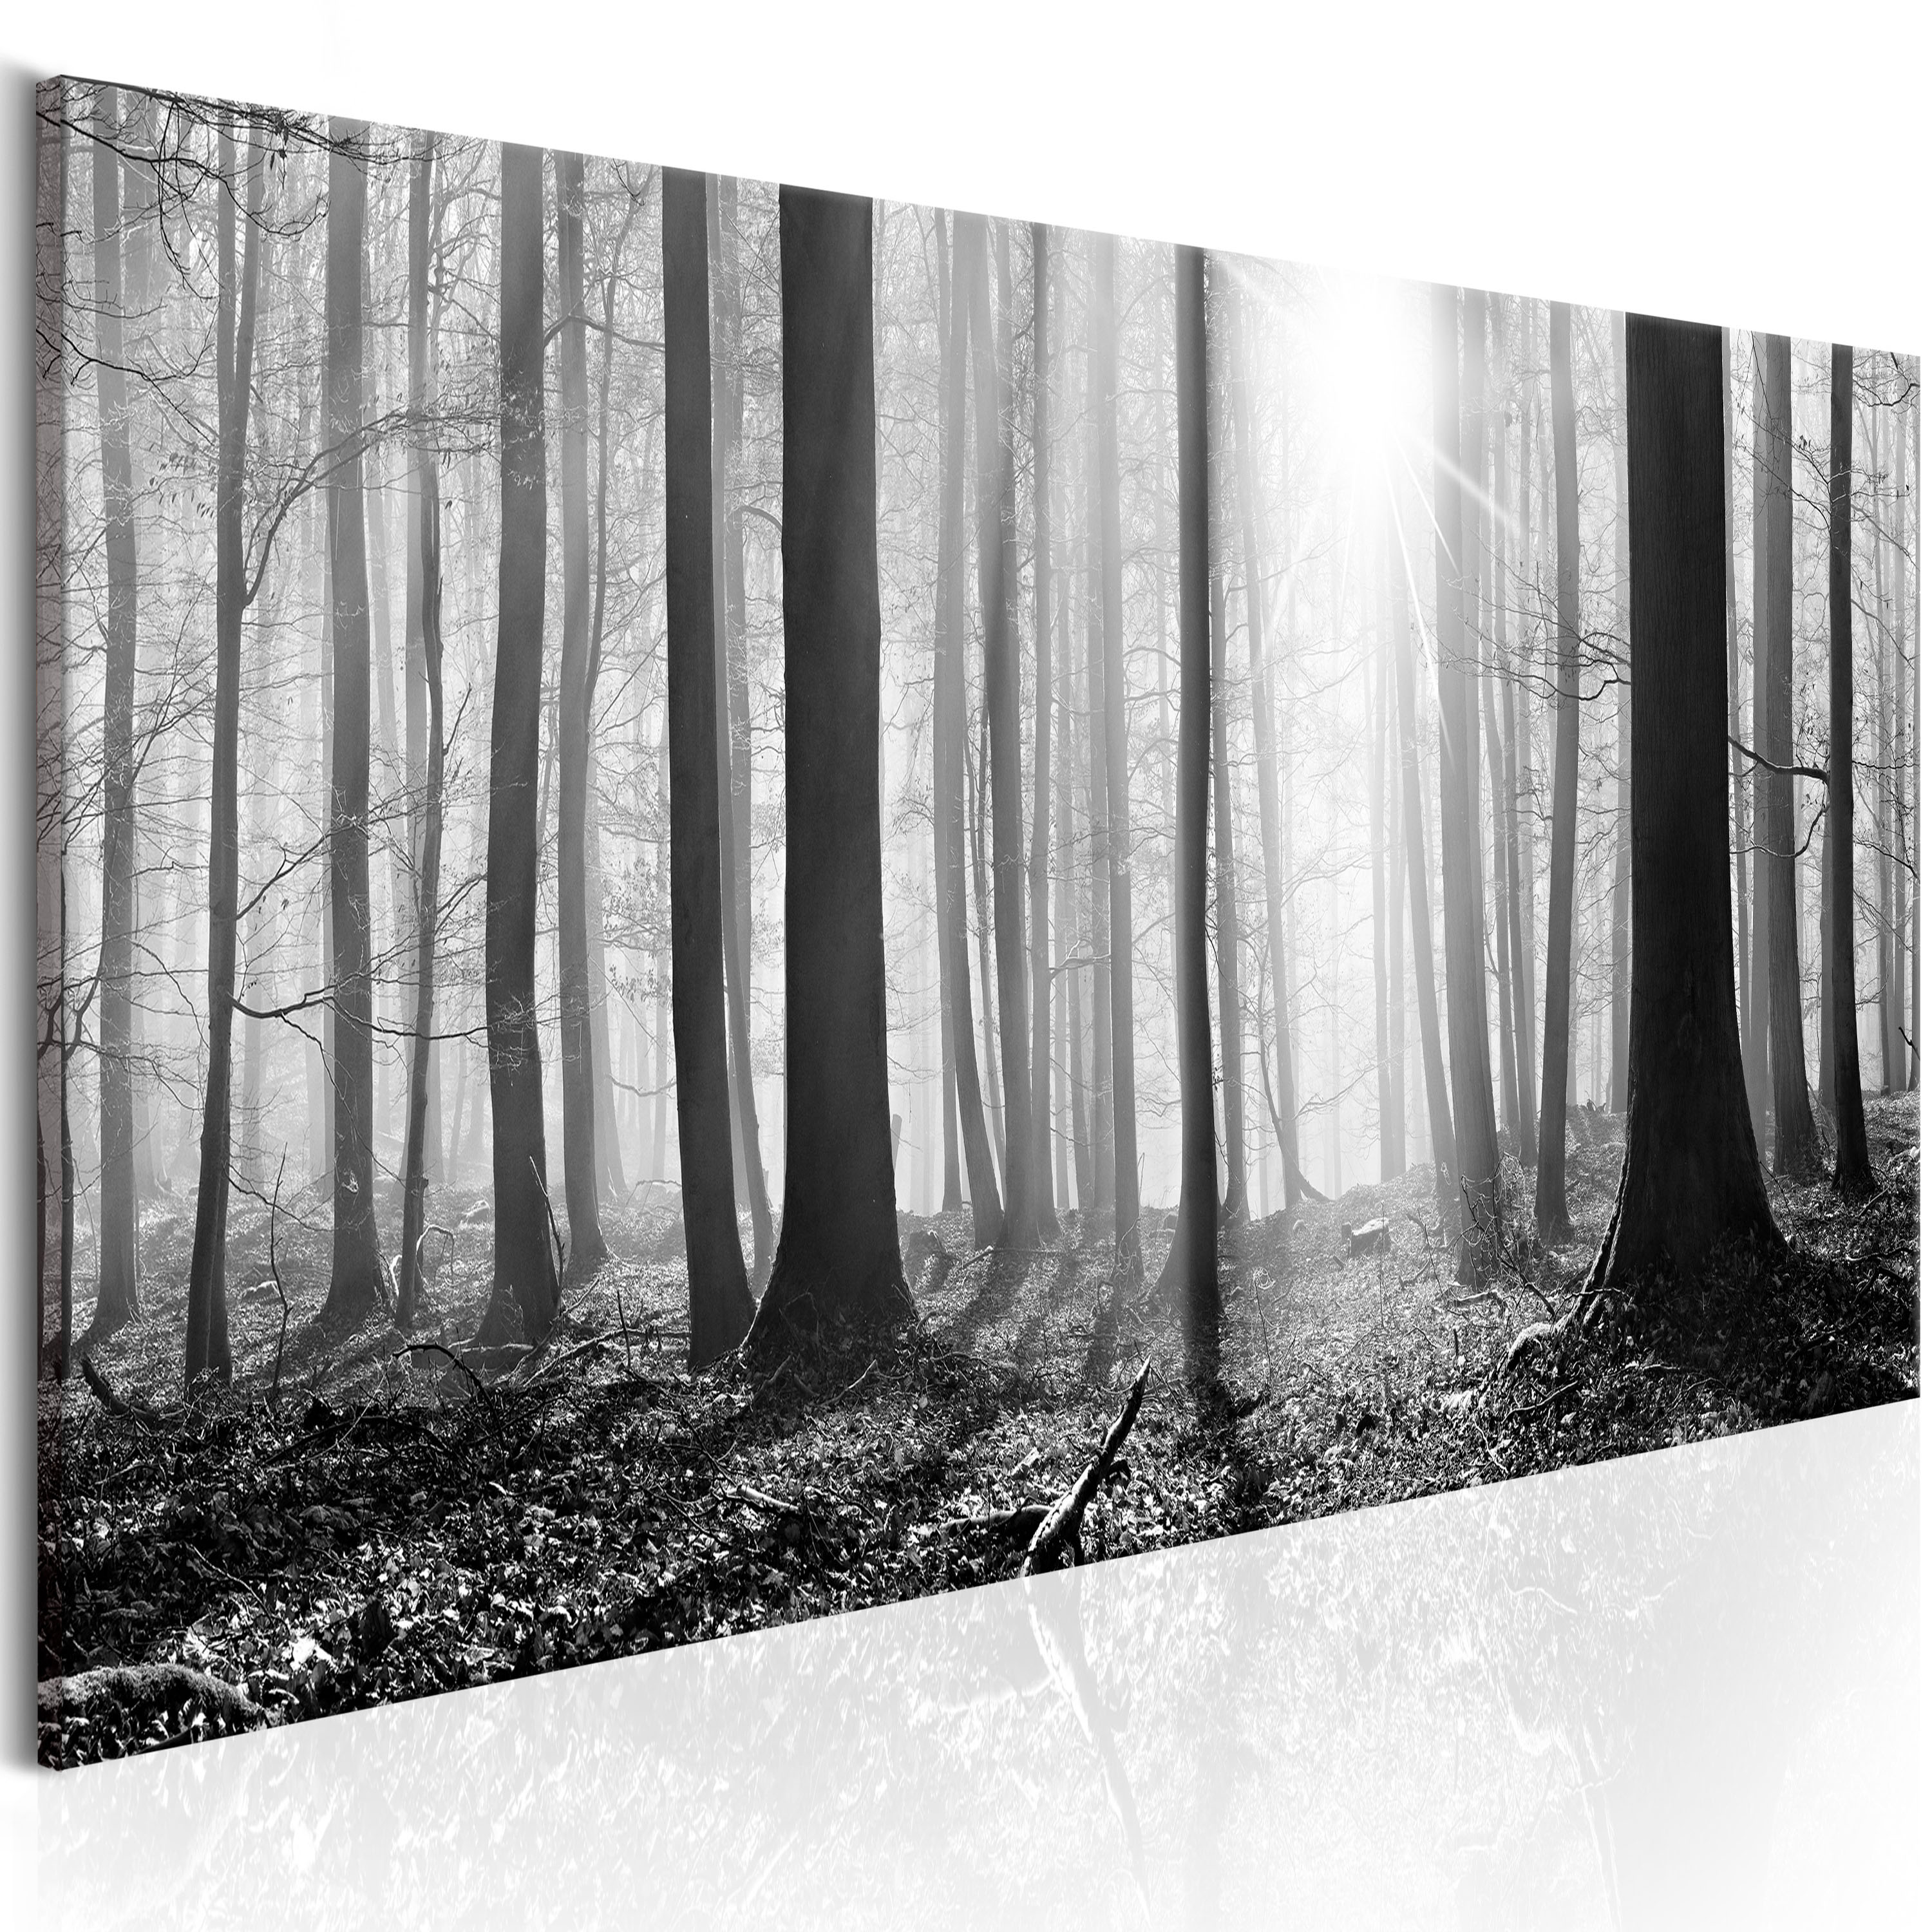 Canvas Print - Black and White Forest - 120x40